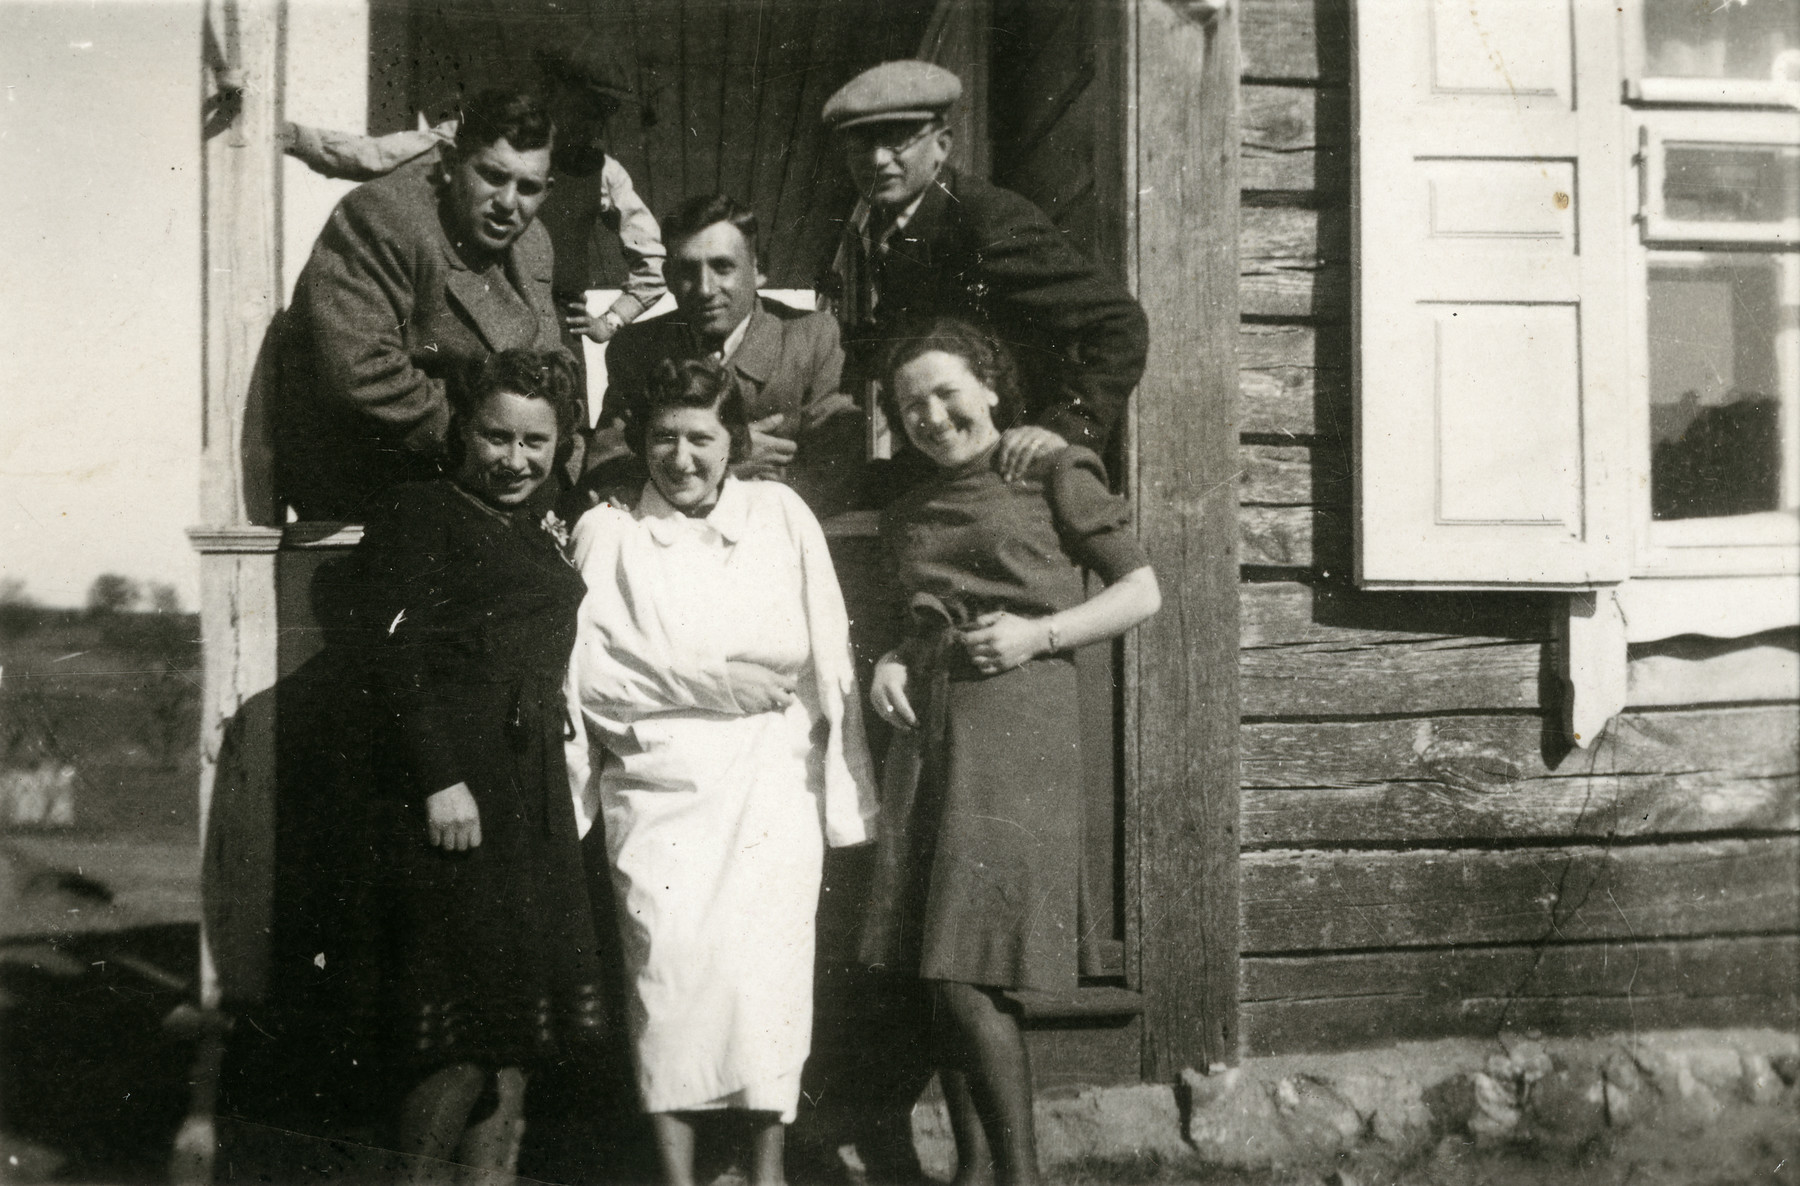 Rachel Godroff, wearing a white coat in the center, with friends in front of their house in Vievis in 1940.